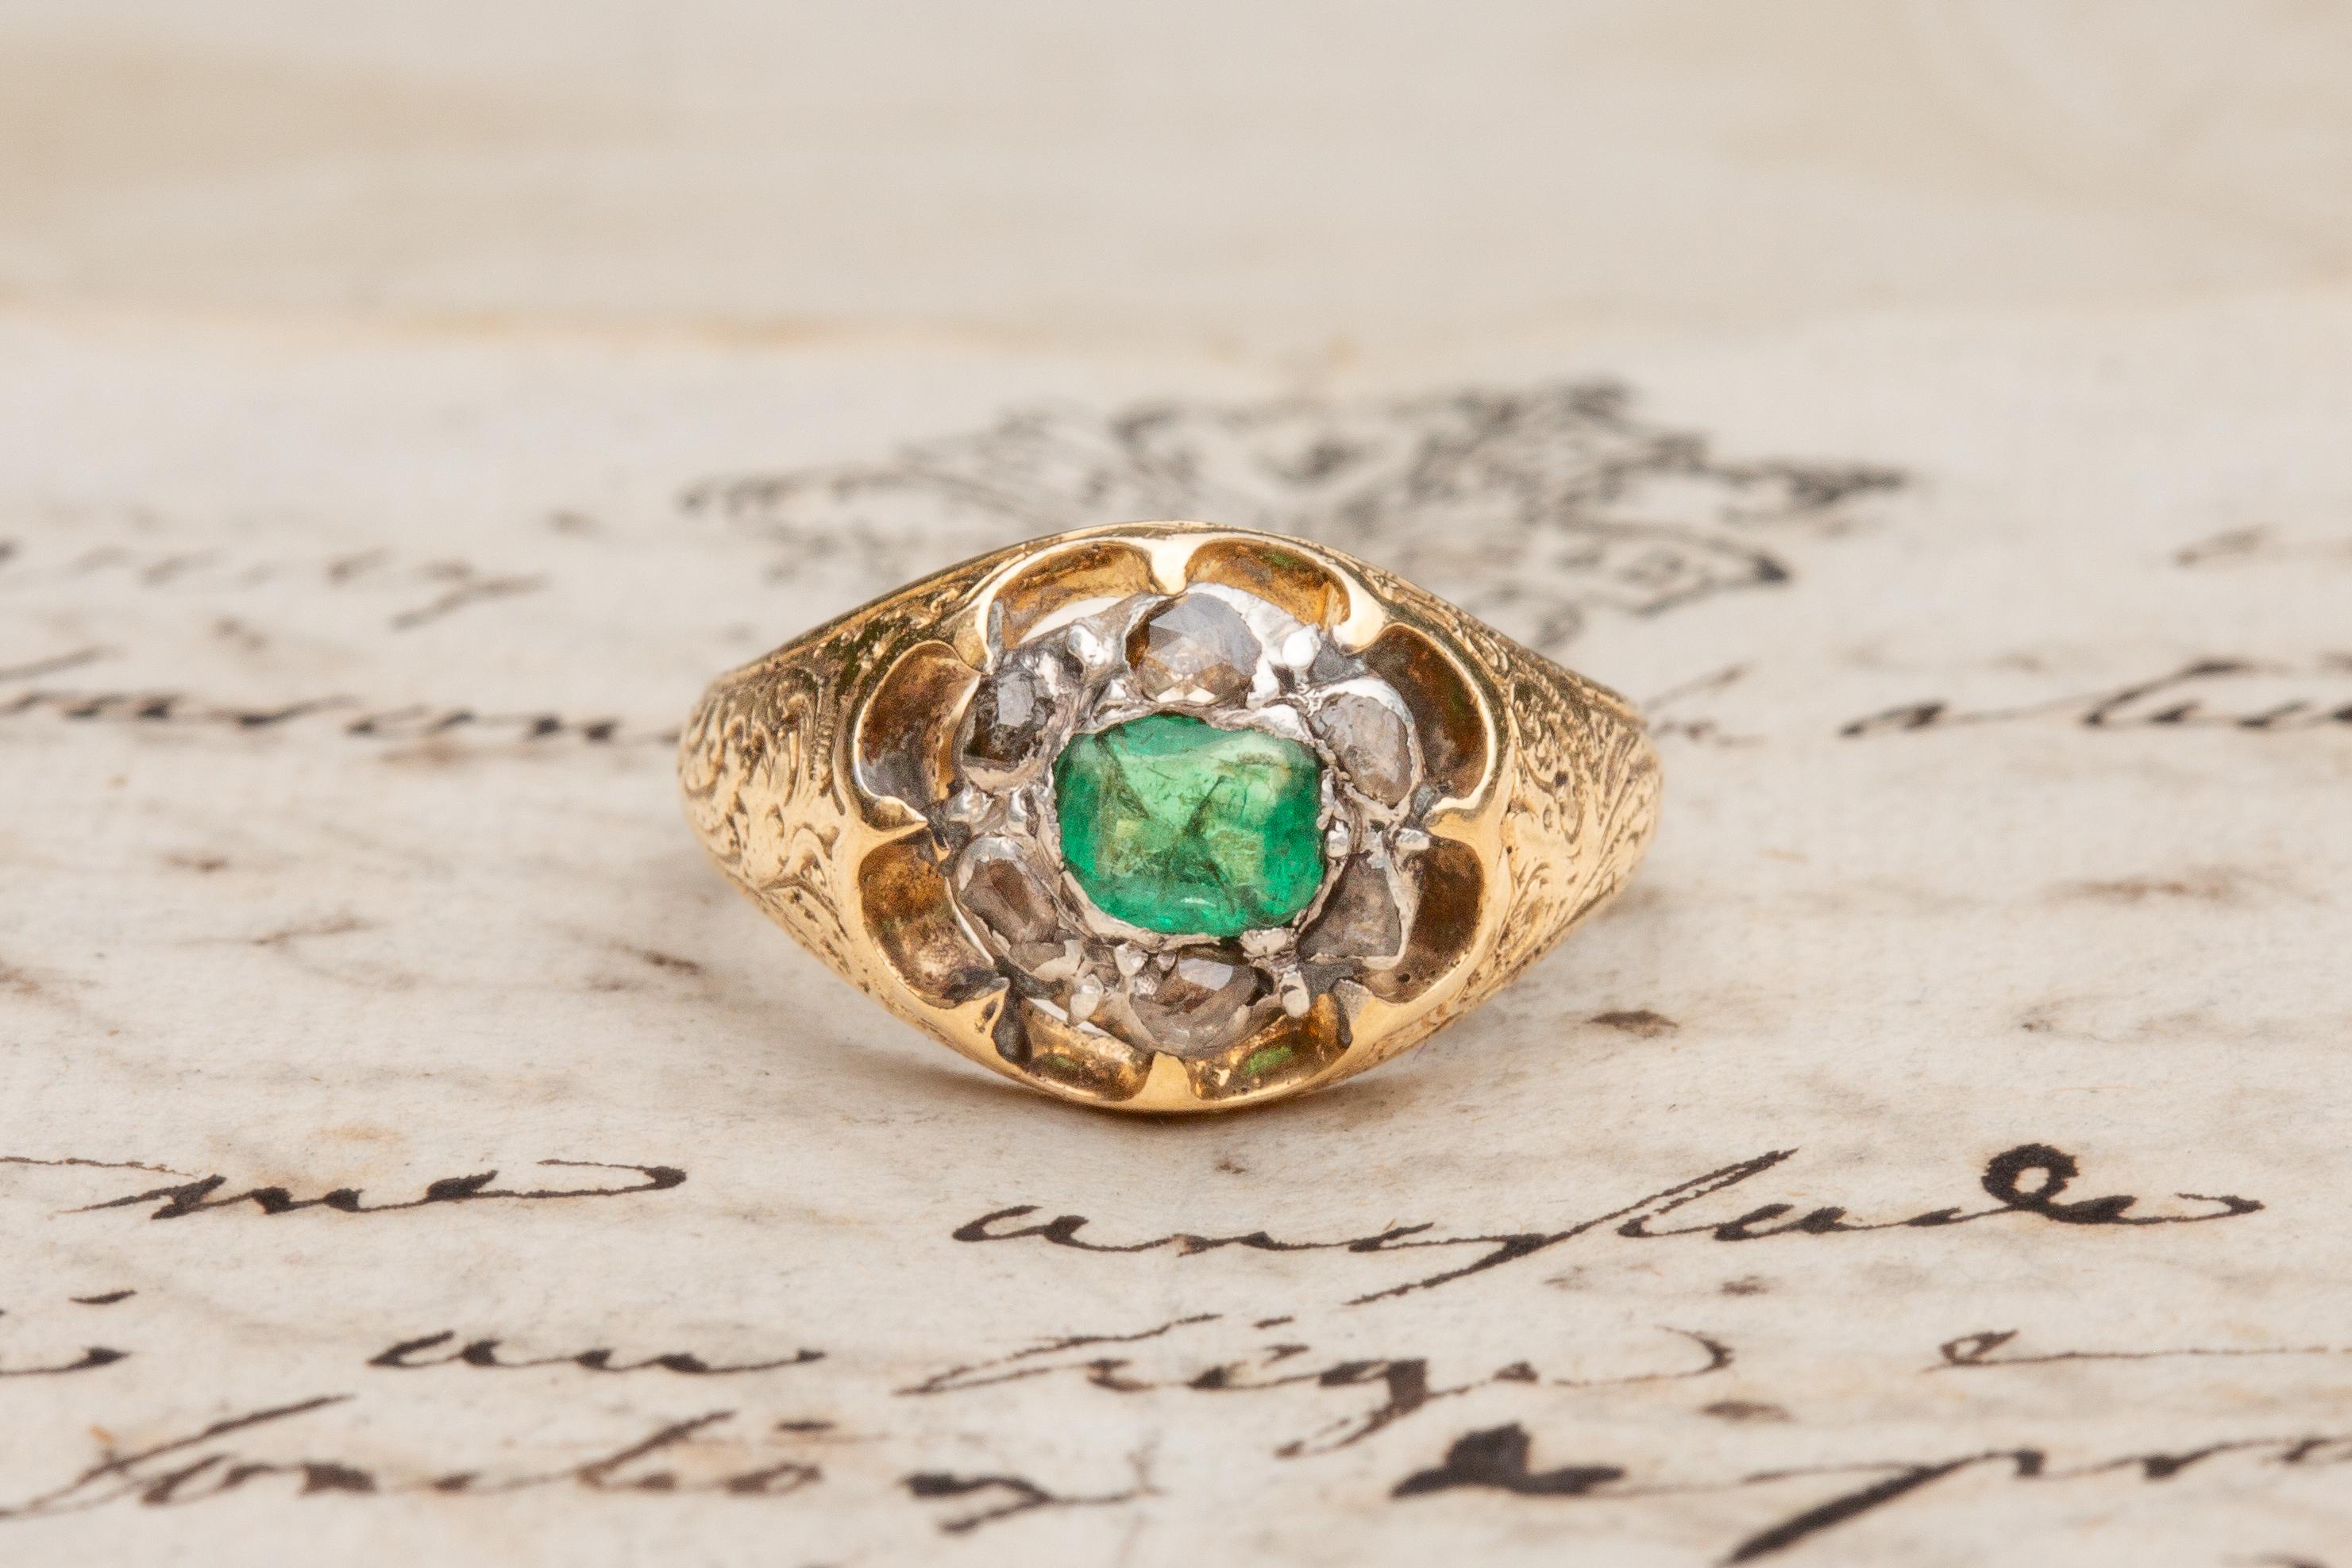 This unusual antique emerald and diamond ring was made in France and dates to the early 19th century.

In the centre rests a vibrant 0.3ct step cut emerald in an open-backed rubover silver setting. The stone is a wonderful vivid green colour and